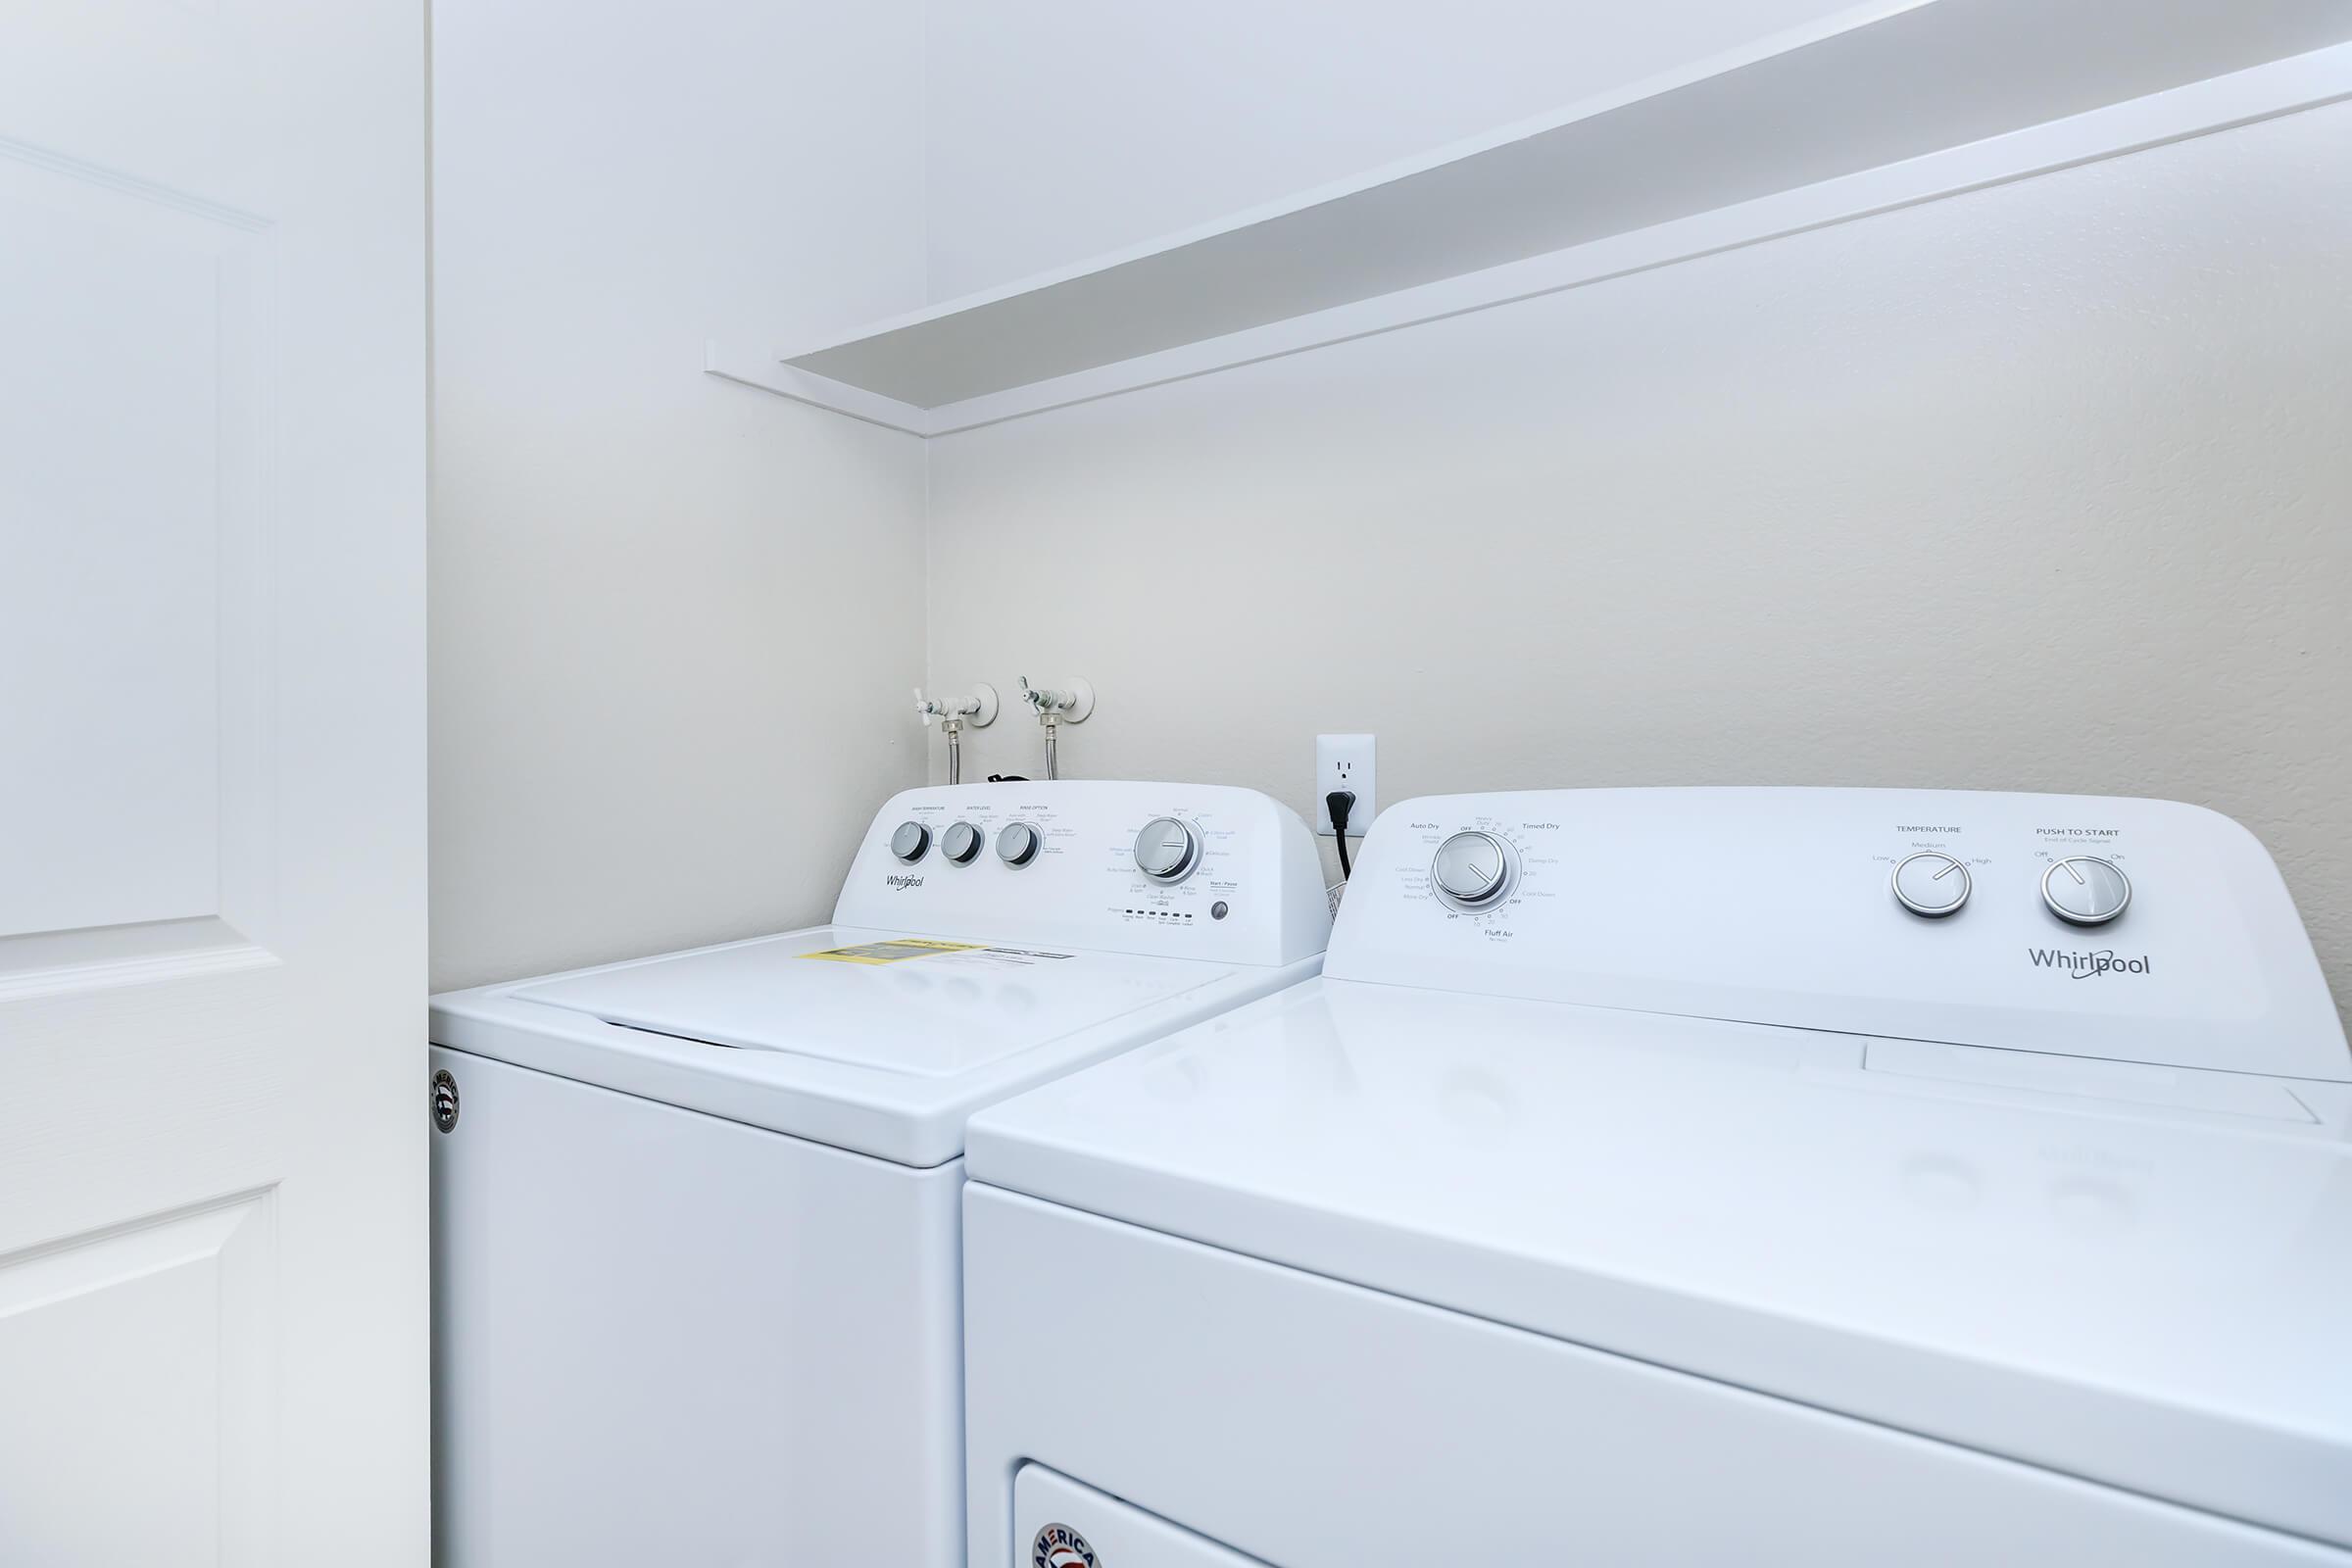 Sunset Hills provides full-sized washer and dryer in apartment home for rent